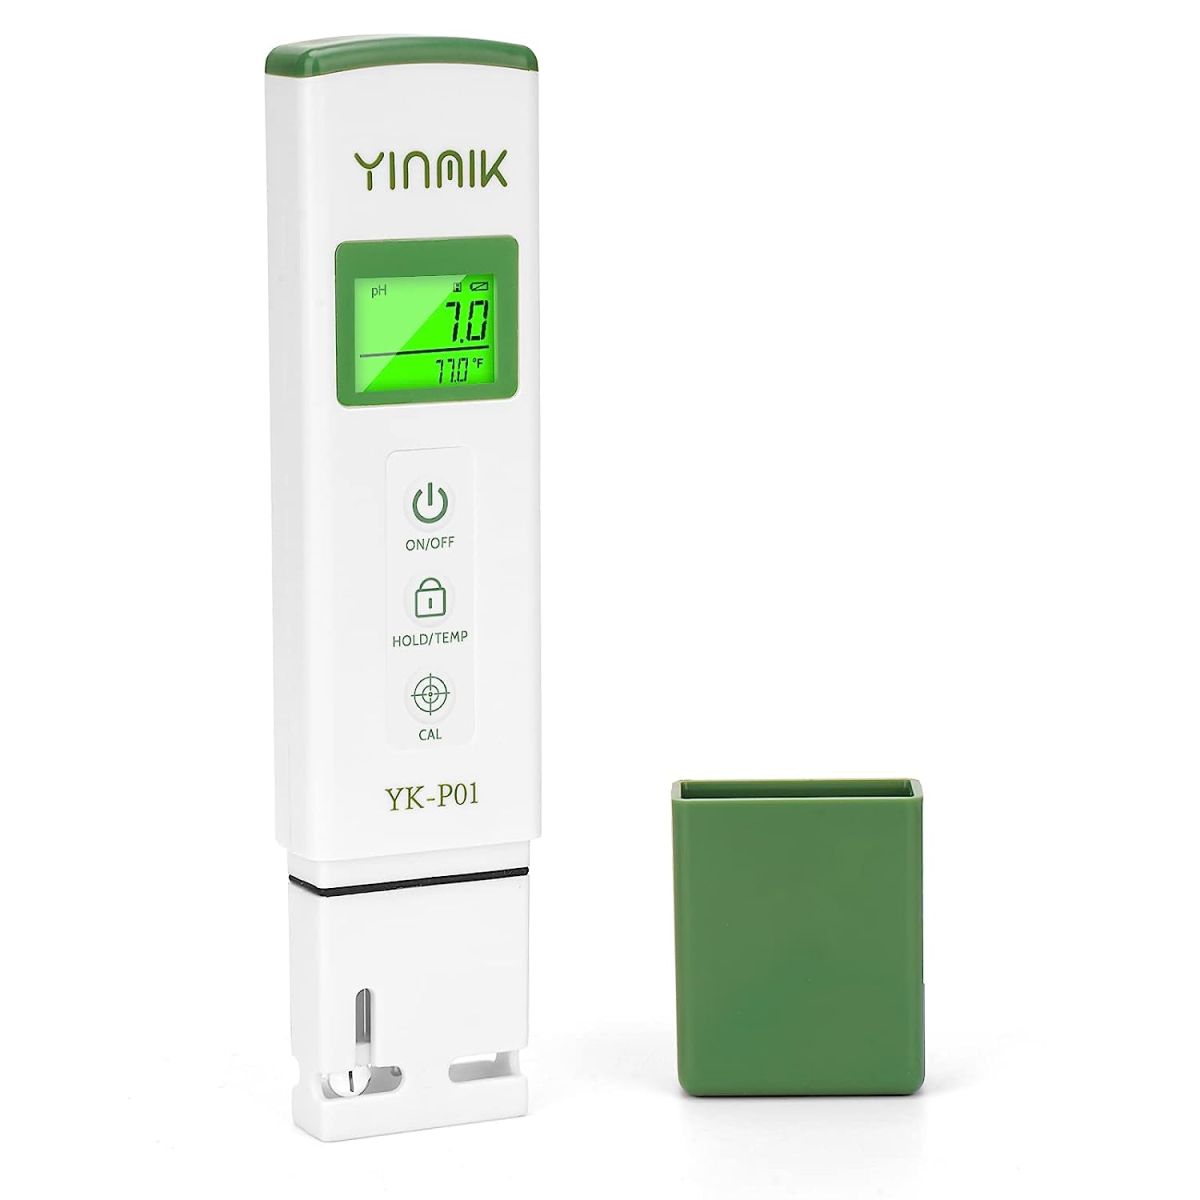 pH Tester Digital pH Meter for Water Hydroponics, Accurate pH Temp Meter with ATC for Pool, Spa, Hot Tub, Indoor Plants, Drinking Water, Wine Beer Home Brewing, Aquarium